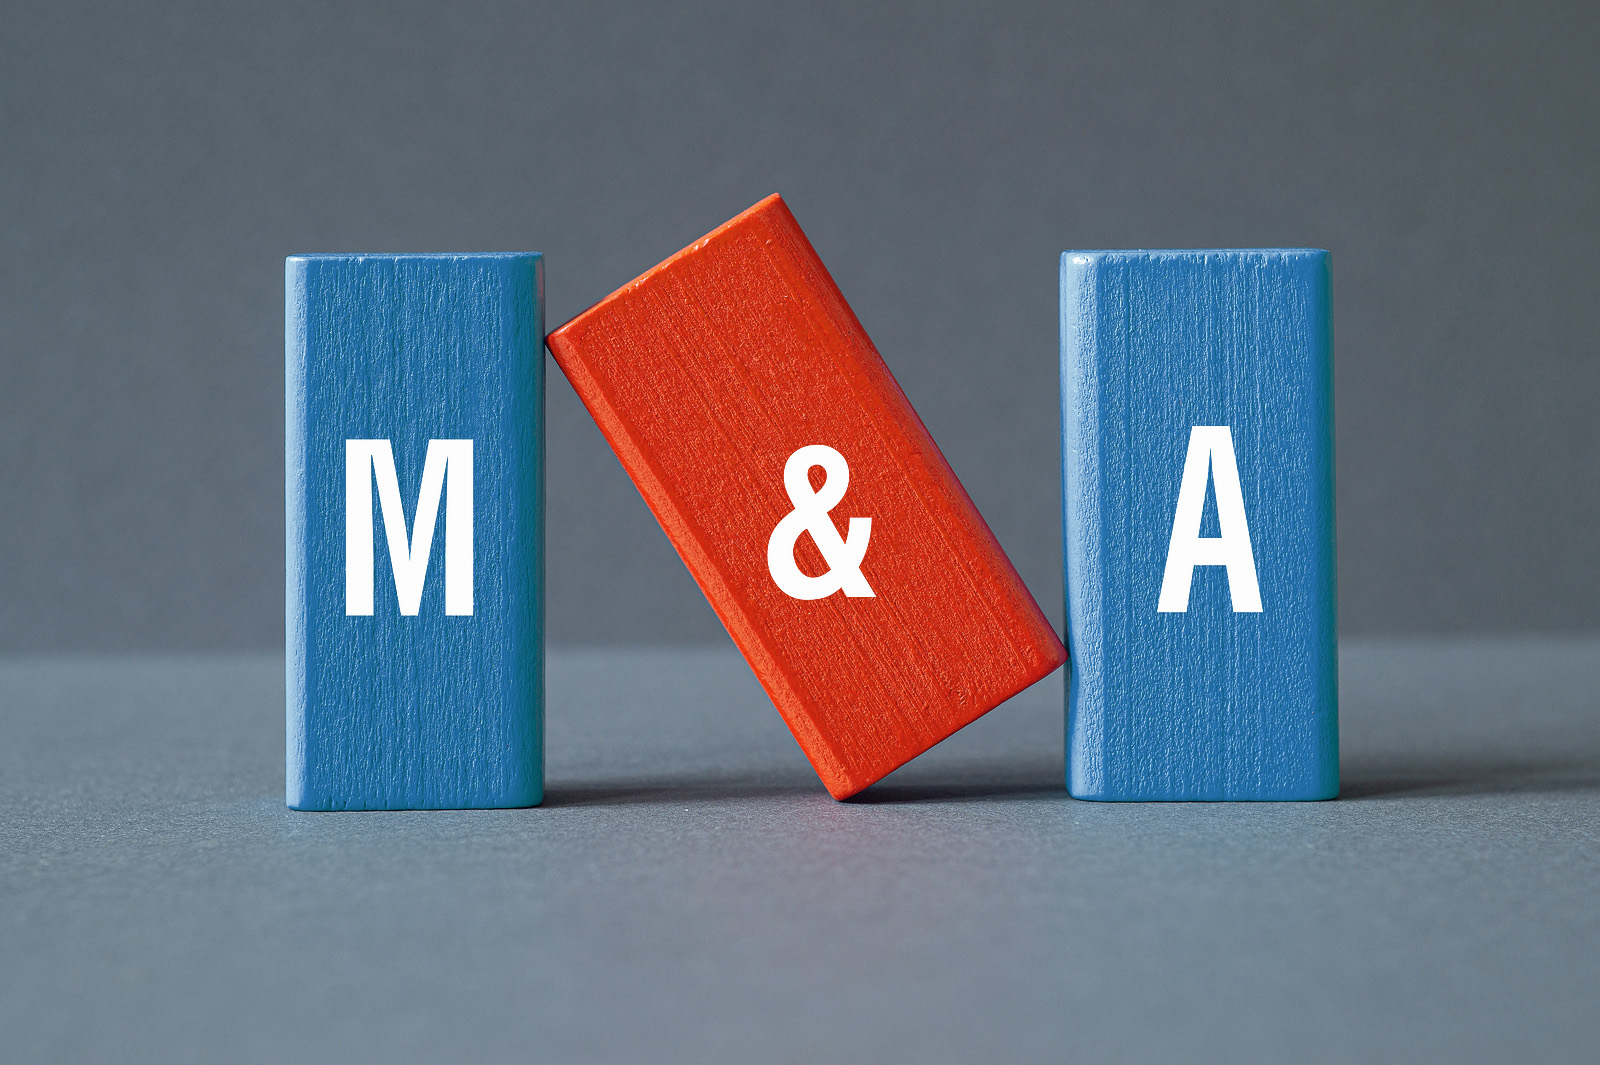 Building blogs with M & A on them, representing mergers & acquisitions.